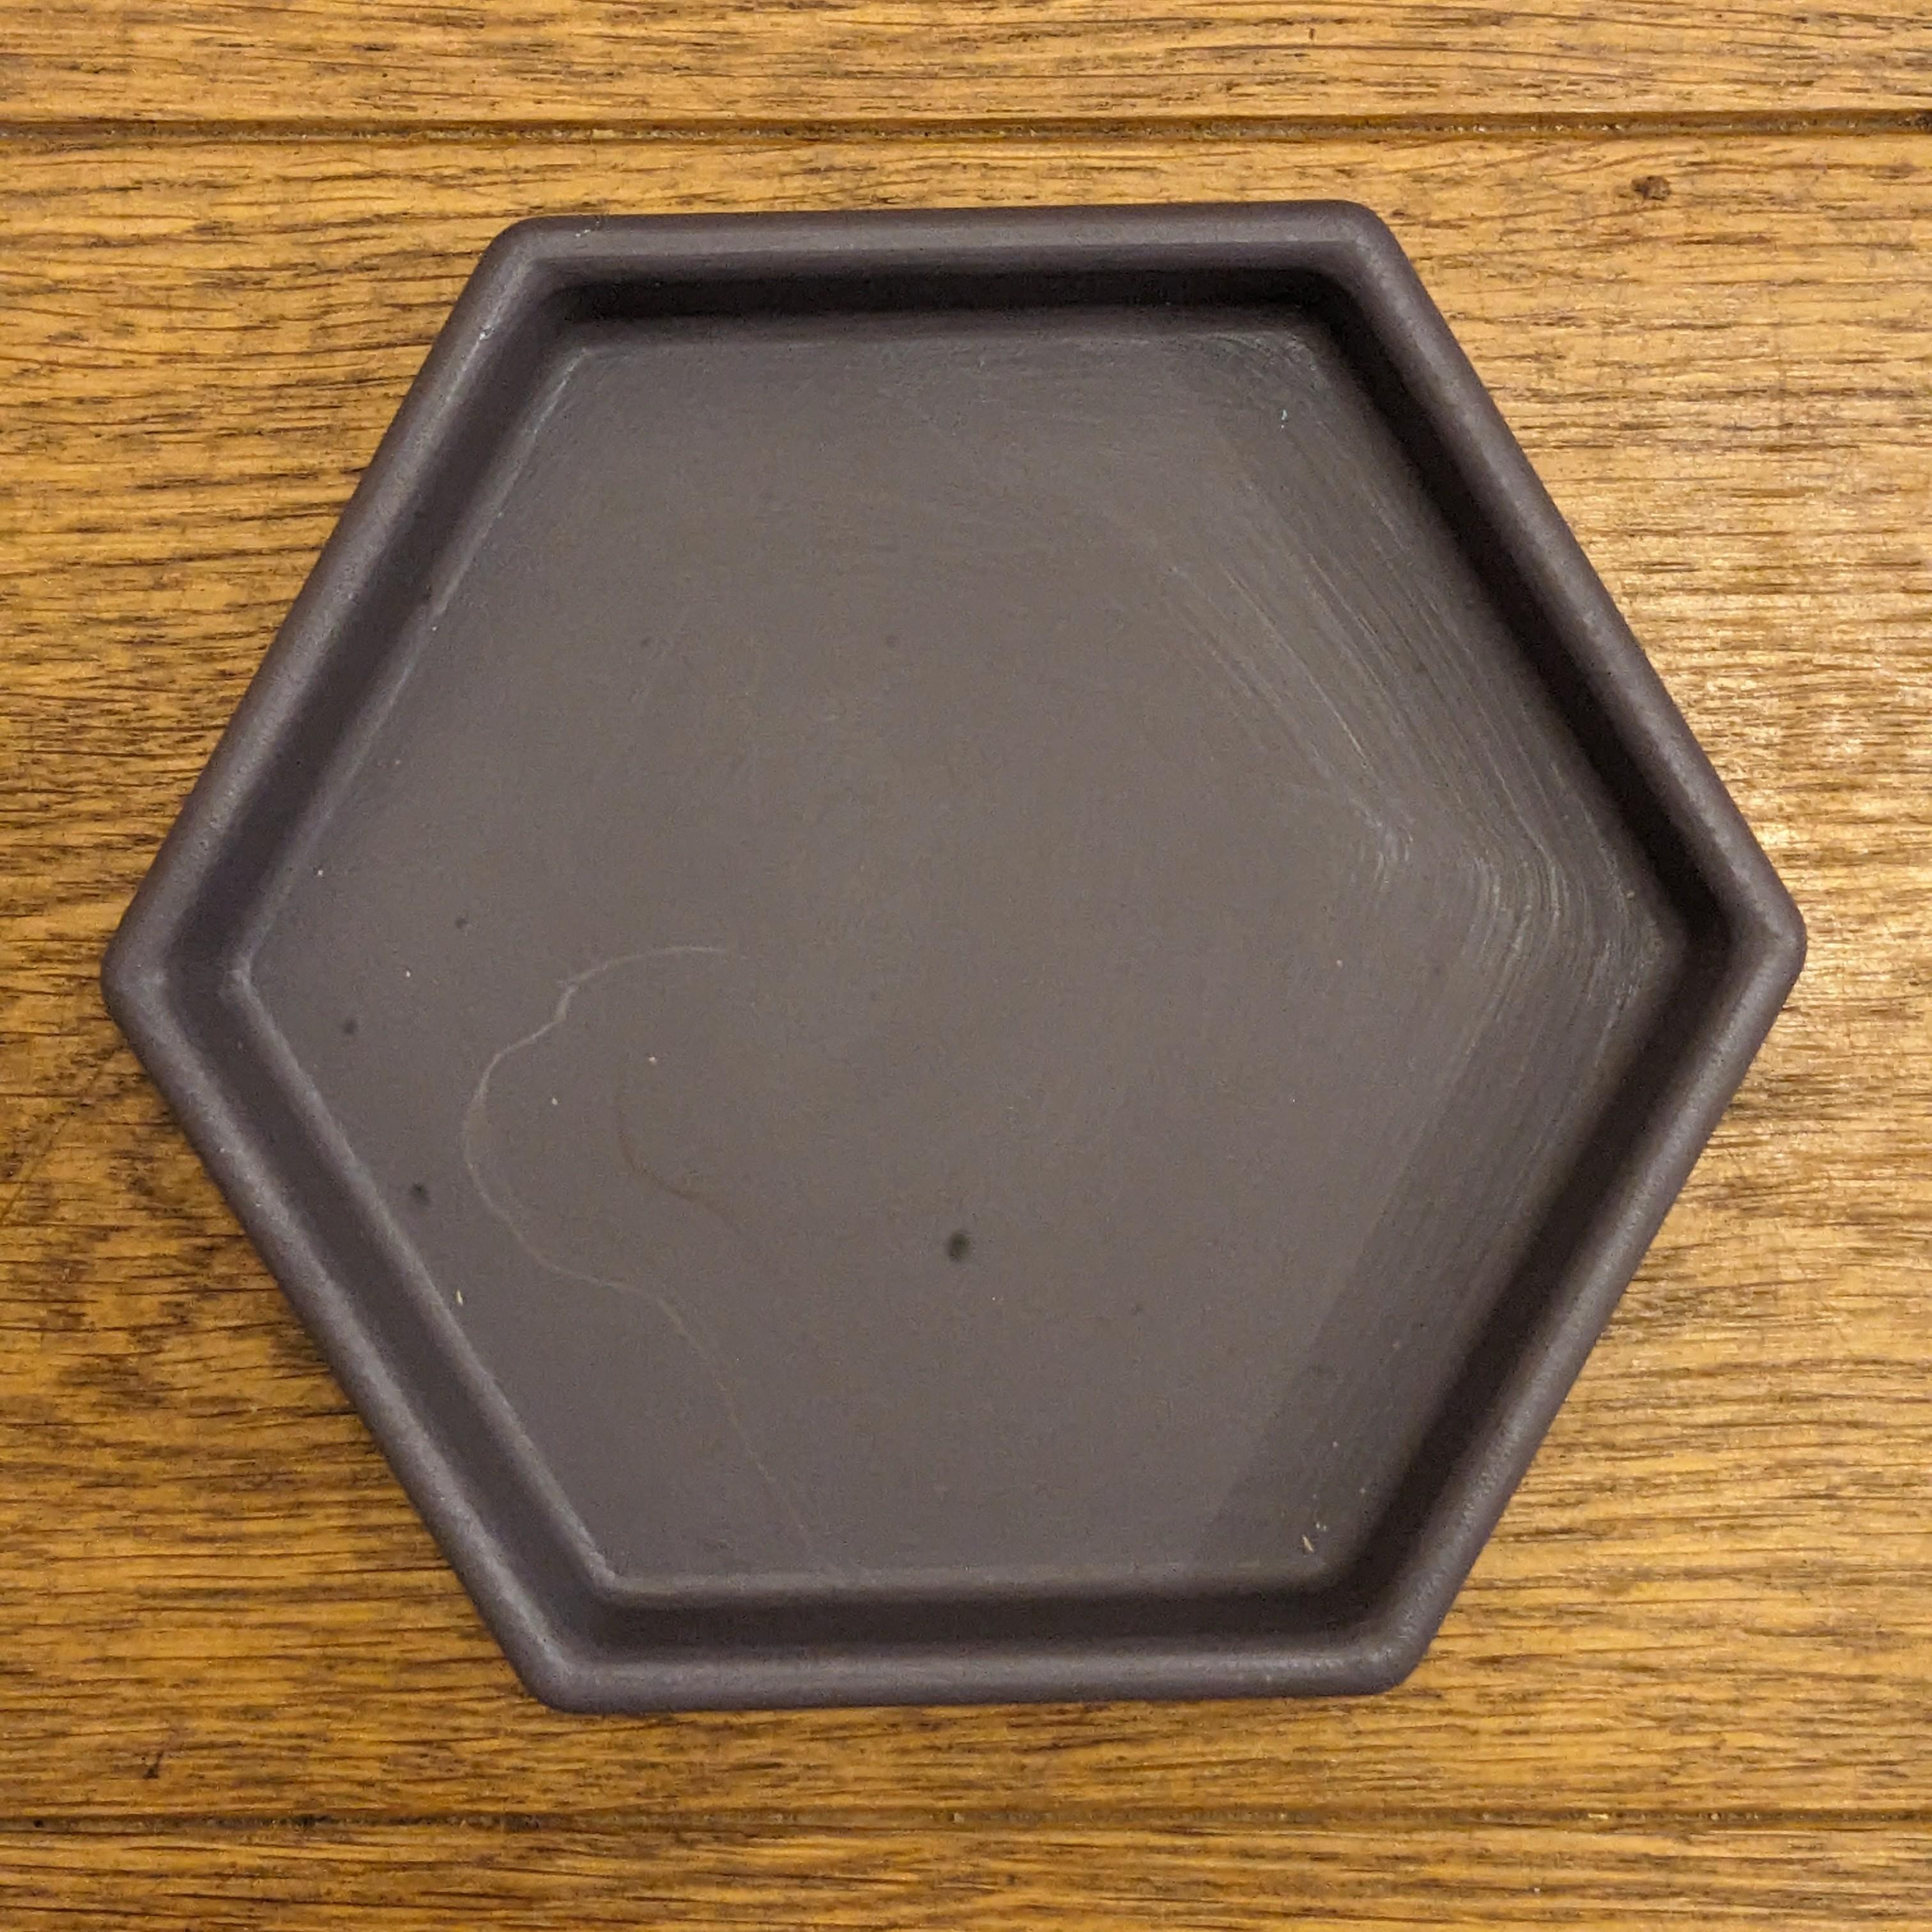 Vacuum forming tray moulds 3d model